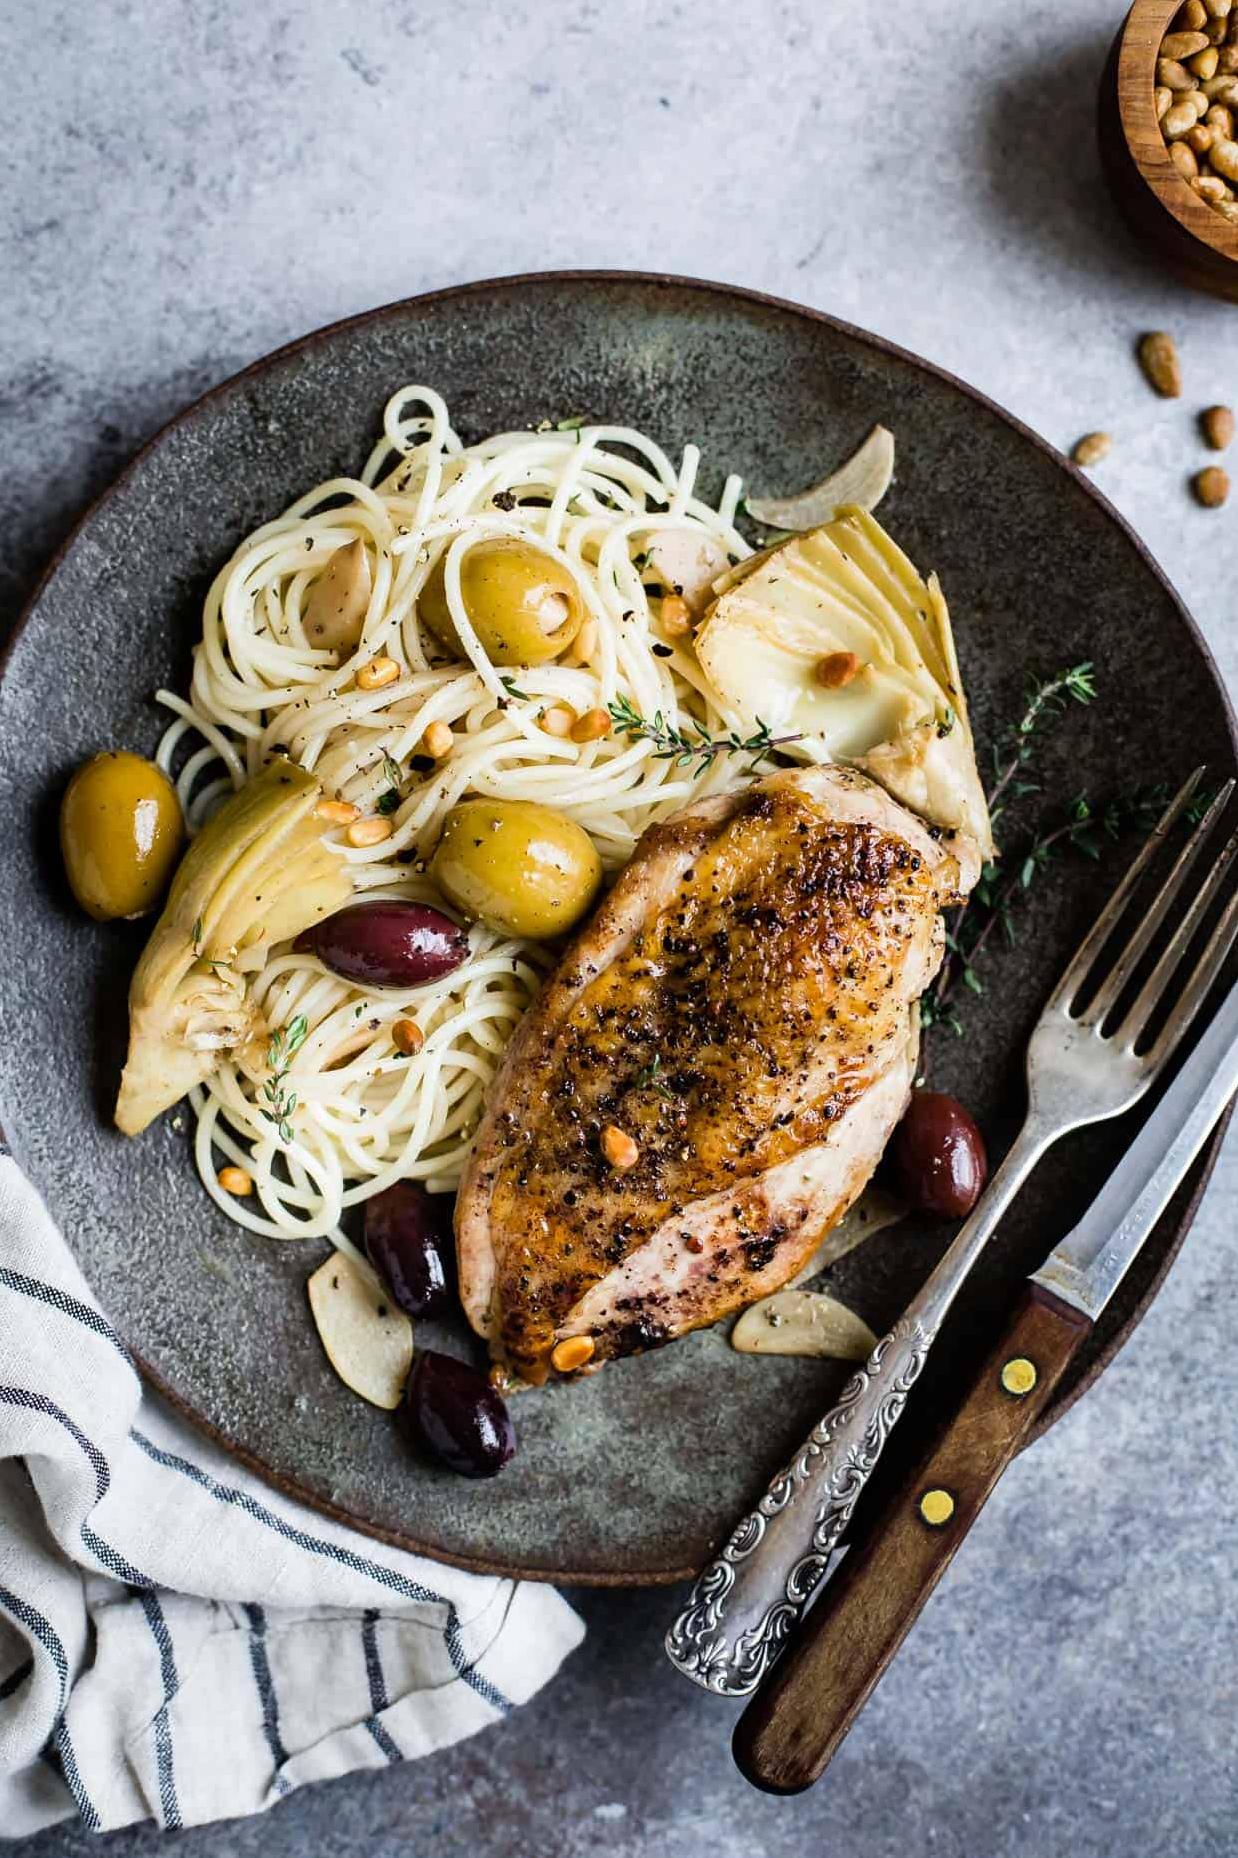  Succulent chicken with a zesty kick from the olives.